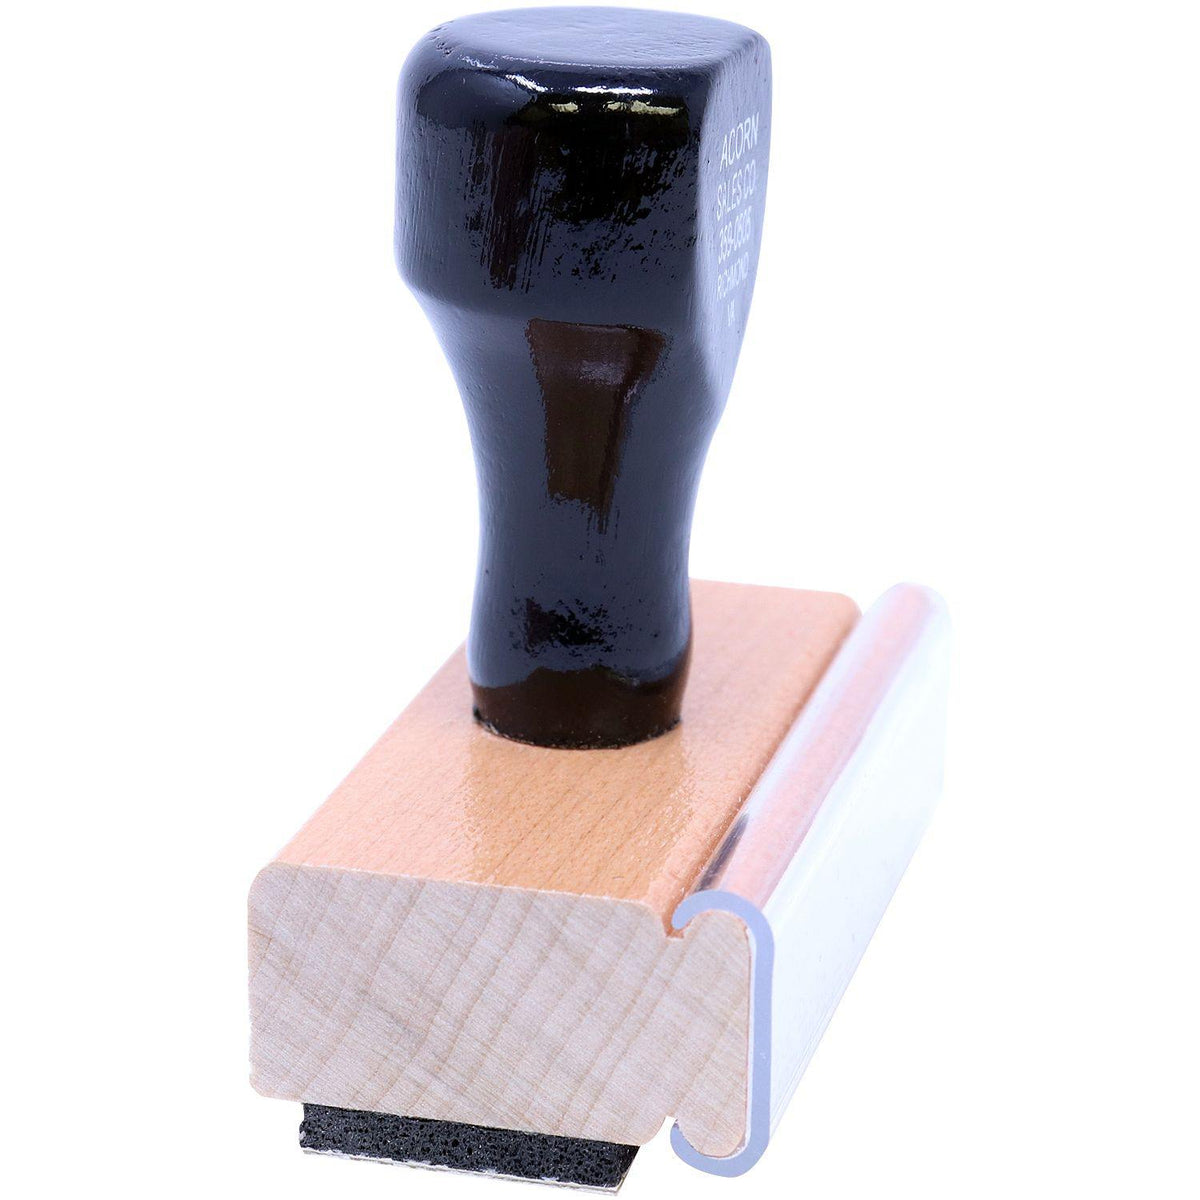 Side View of Bold Deceased Rubber Stamp at an Angle